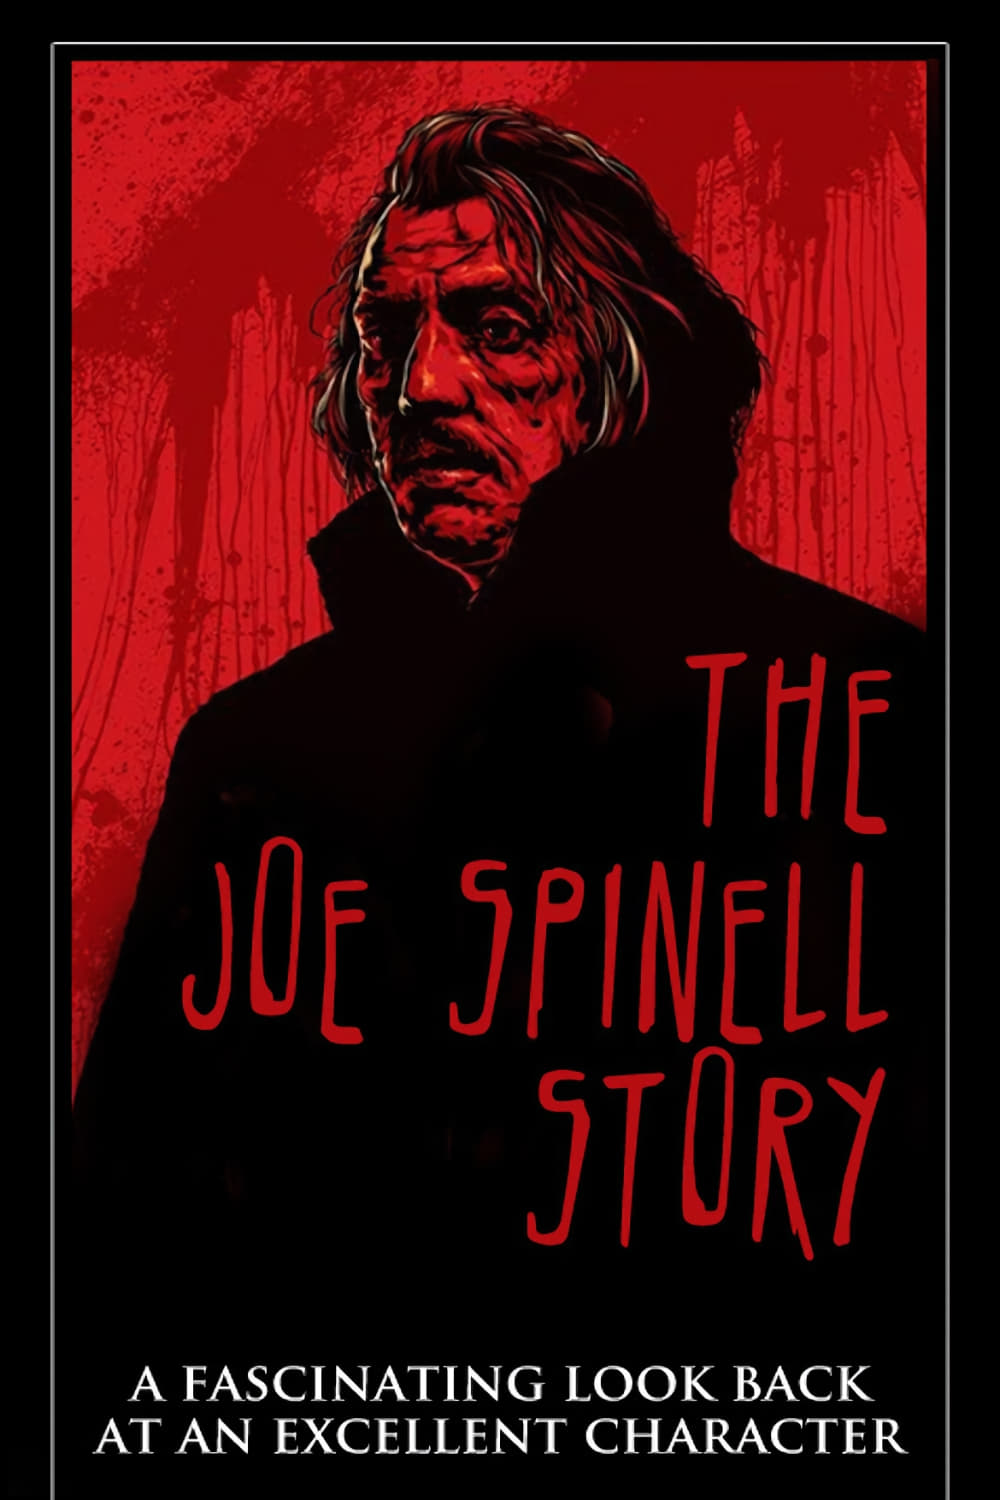 The Joe Spinell Story (2001)